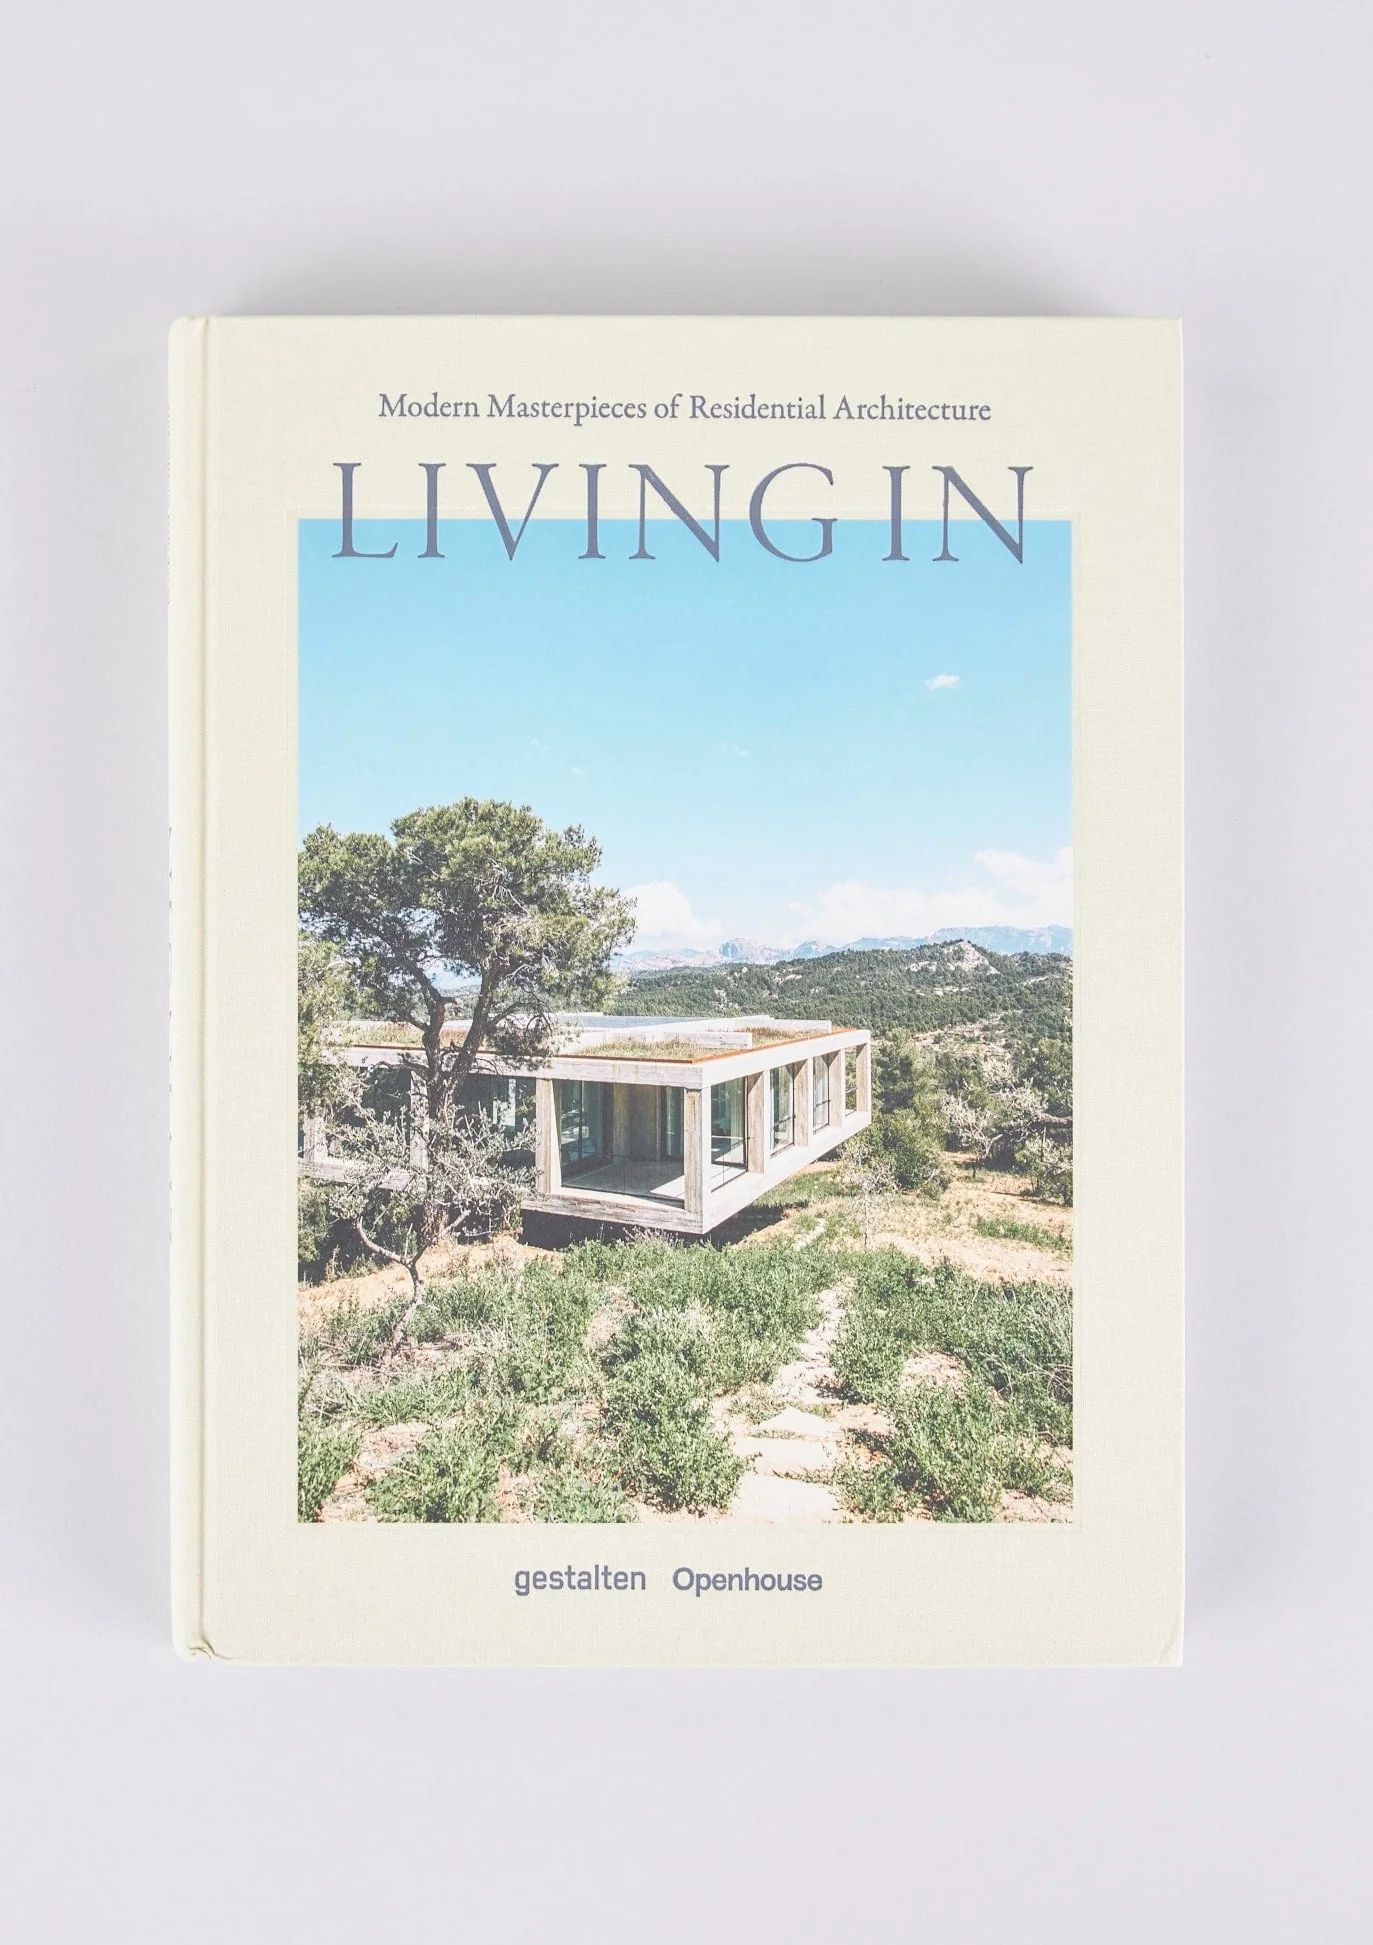 Architectural Coffee Table Book - "Living In" | Afloral